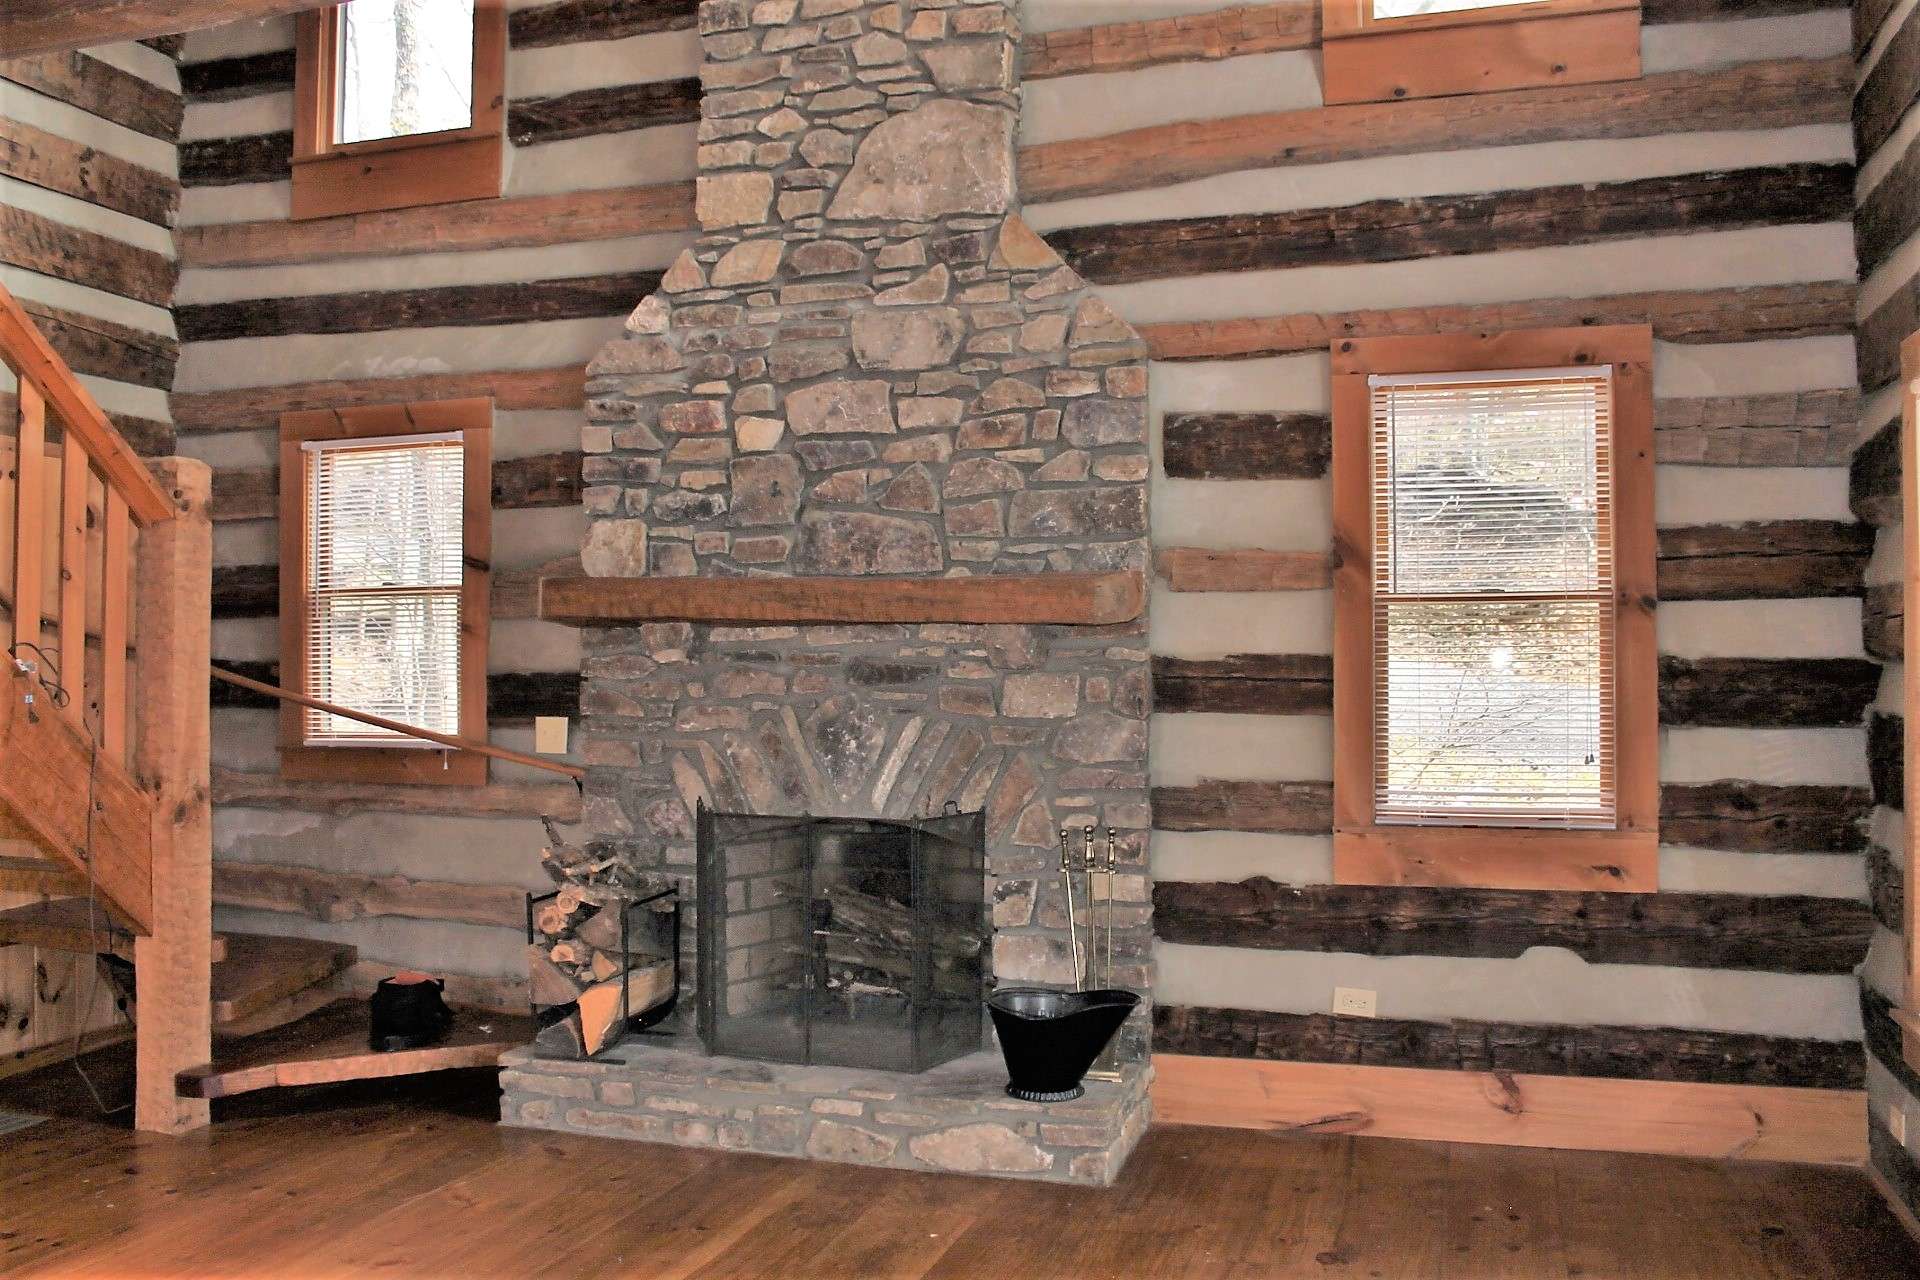 Four windows flank the fireplace to bring in ample light.